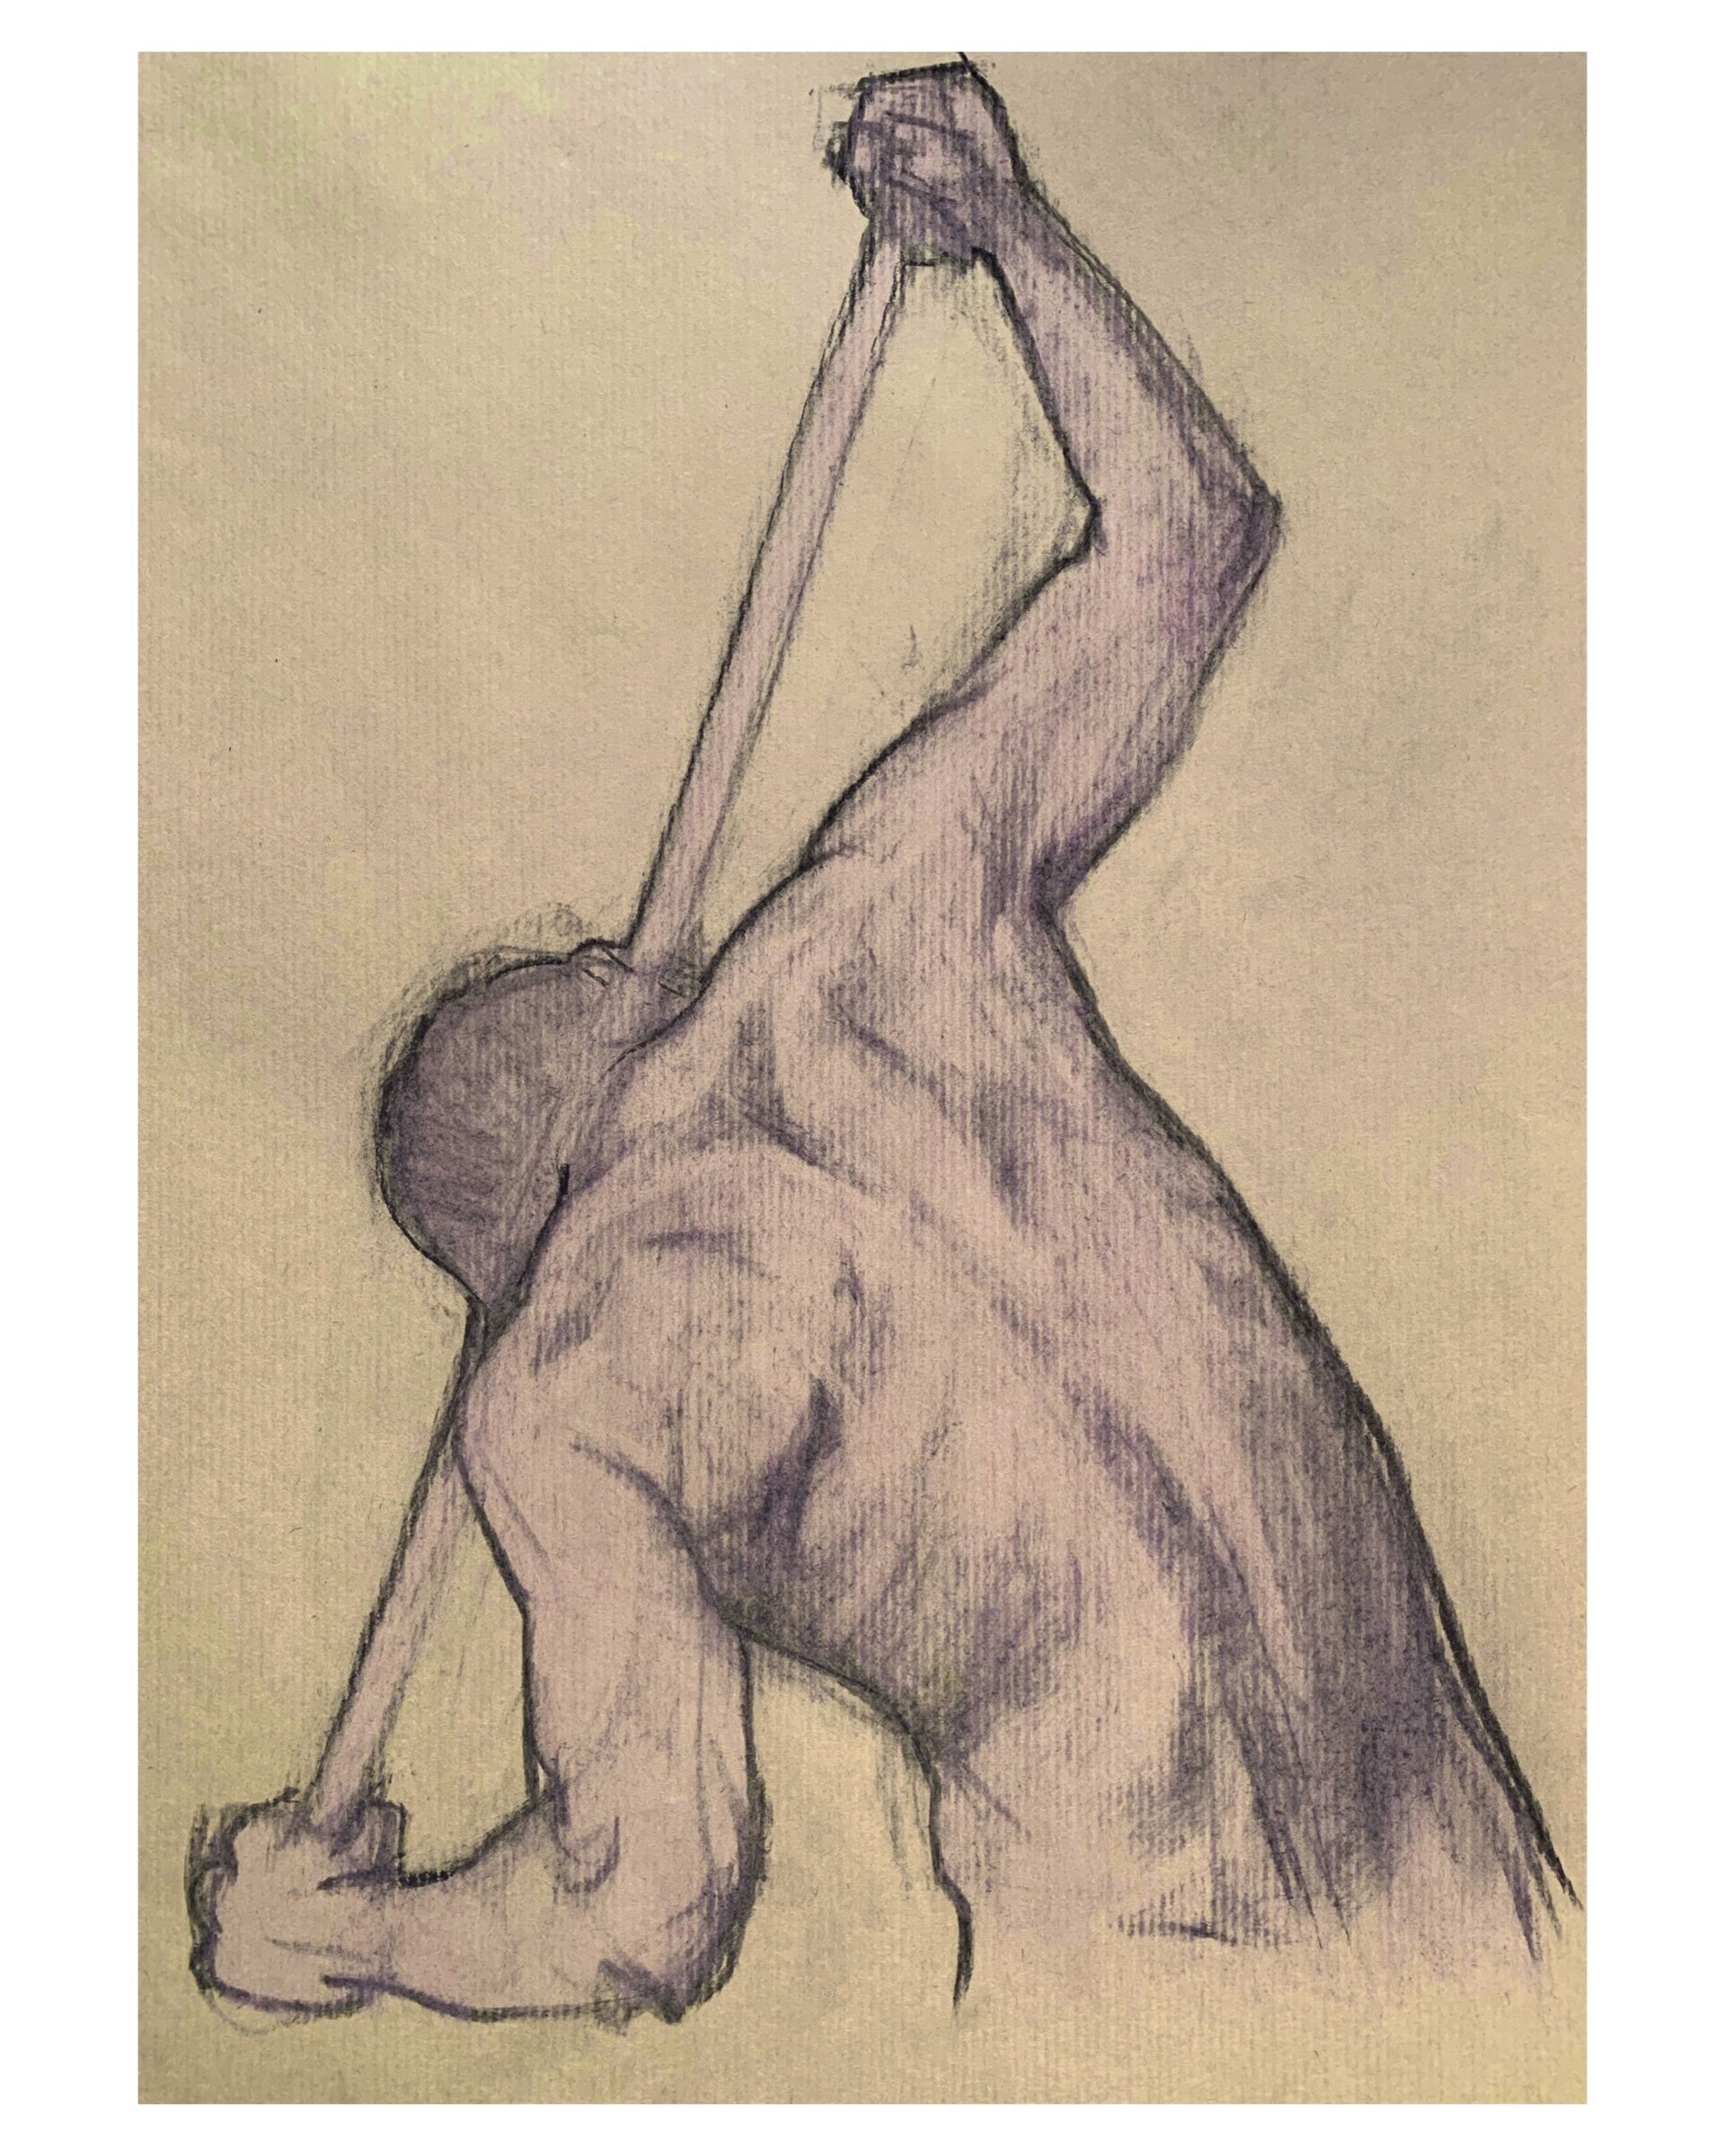   Victor 25 , charcoal and colored pencil on kraft paper, 42x28cm 